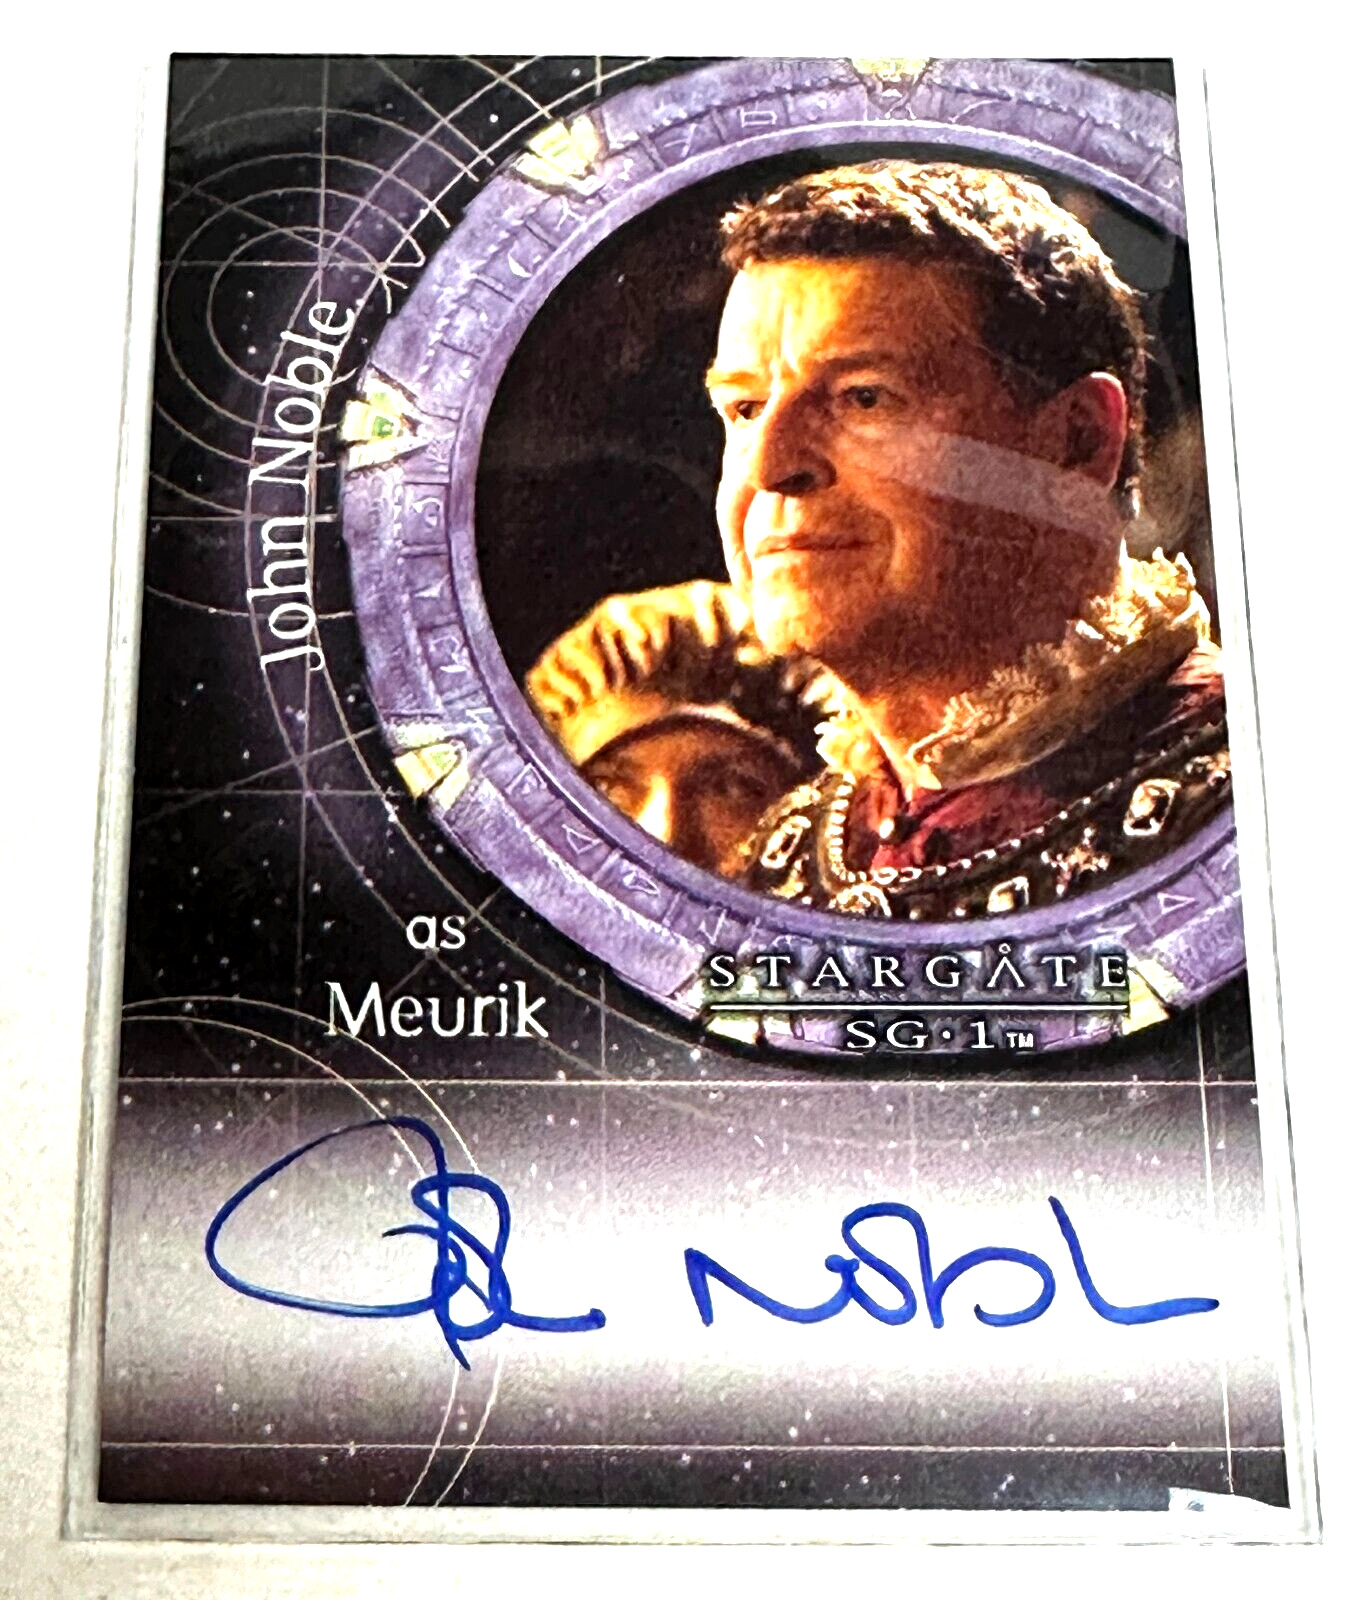 2009 Stargate Heroes Stargate SG-1 Autograph Card Signed by John Noble A114